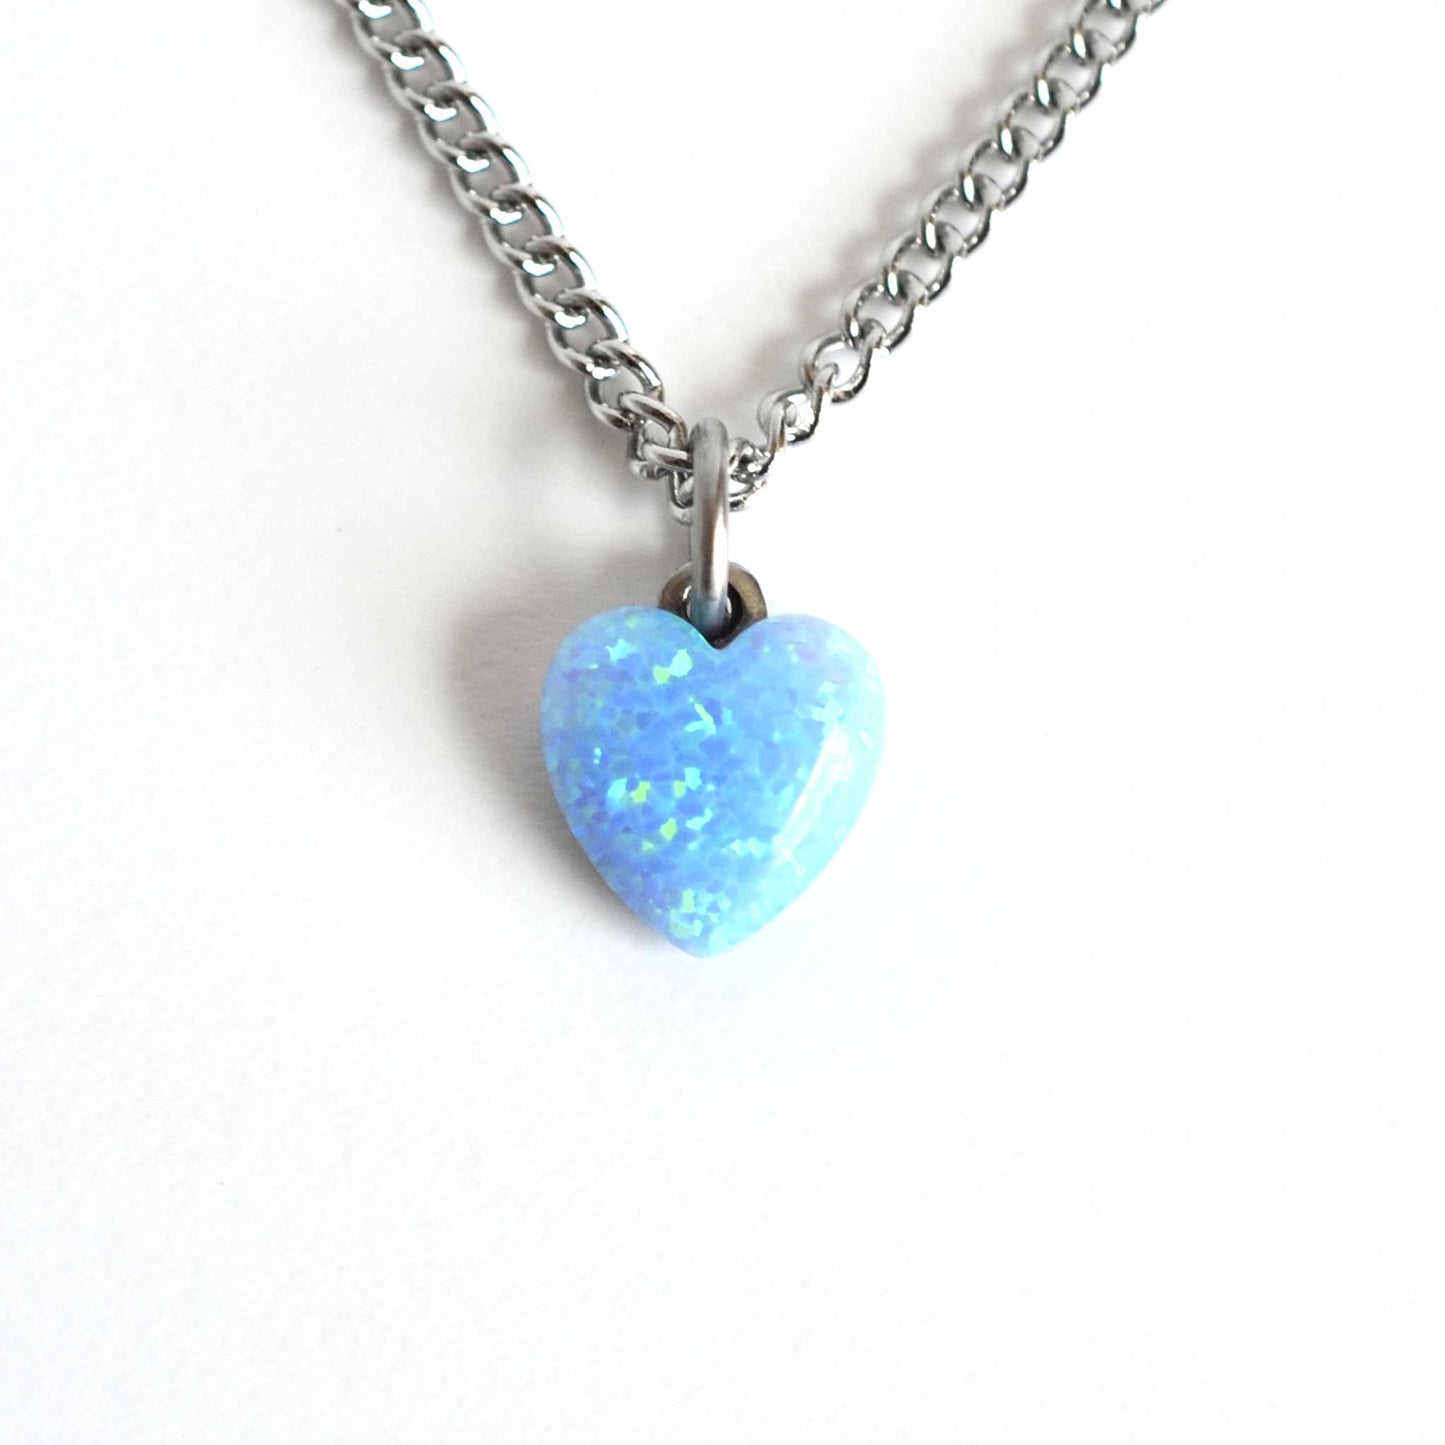 Dainty blue heart necklace on stainless steel chain